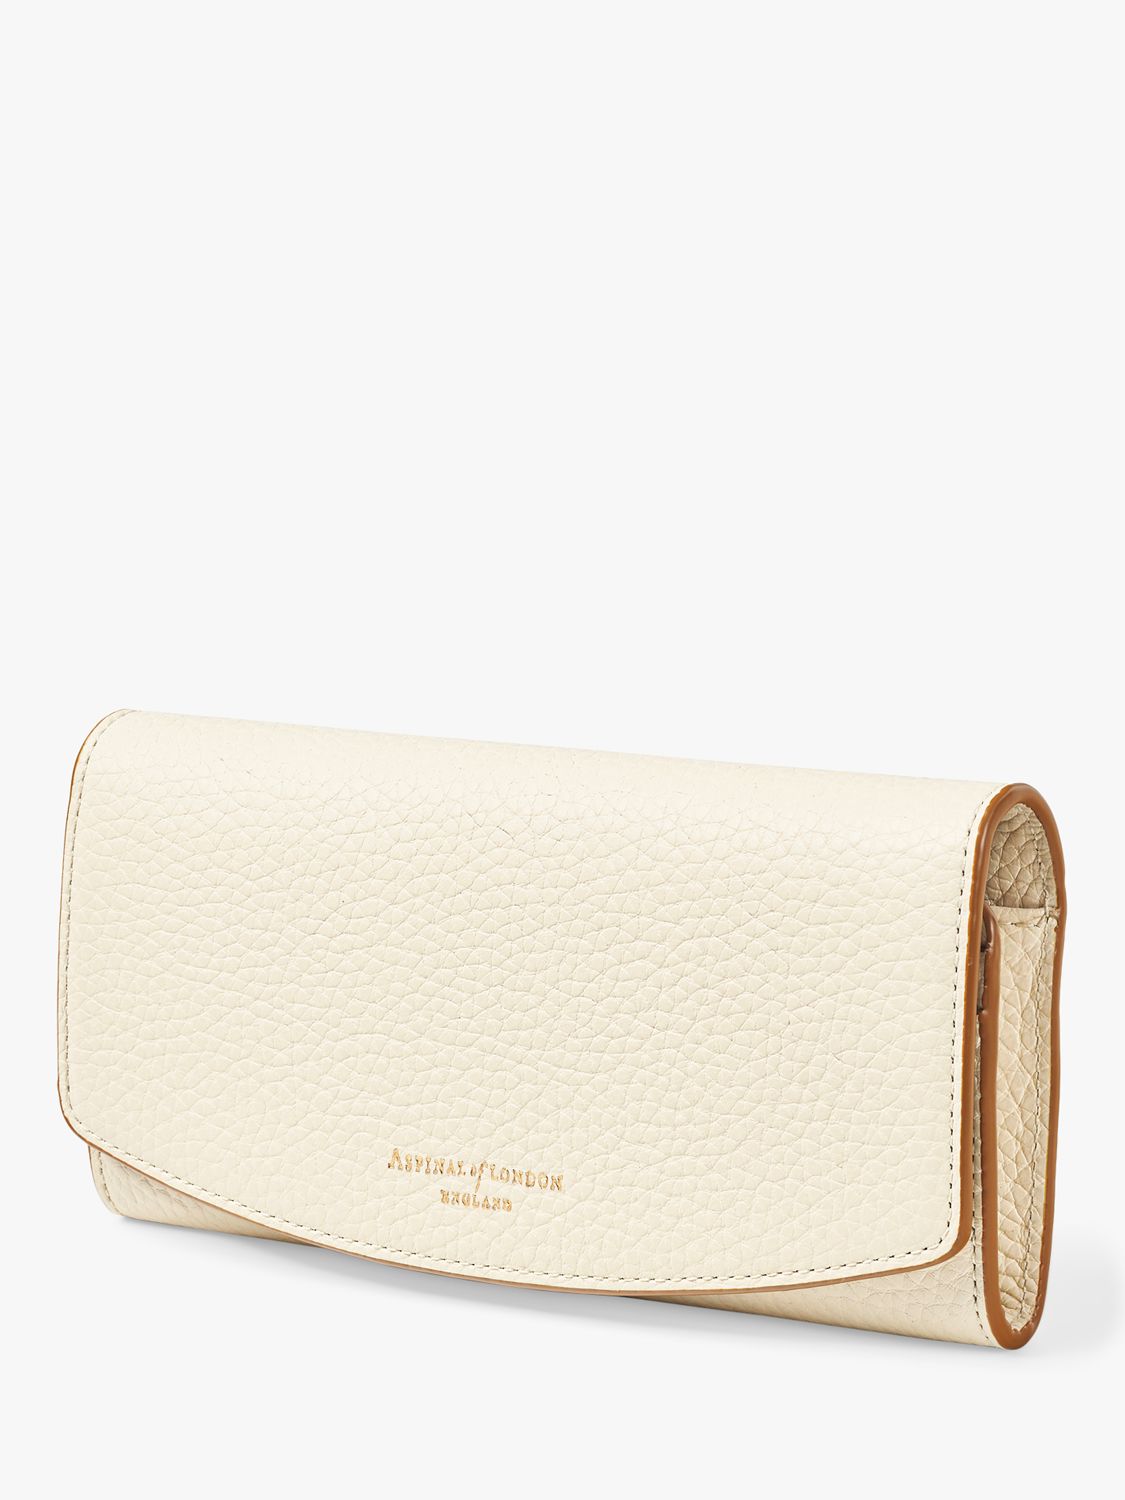 Aspinal of London Essential Pebble Leather Purse, Ivory